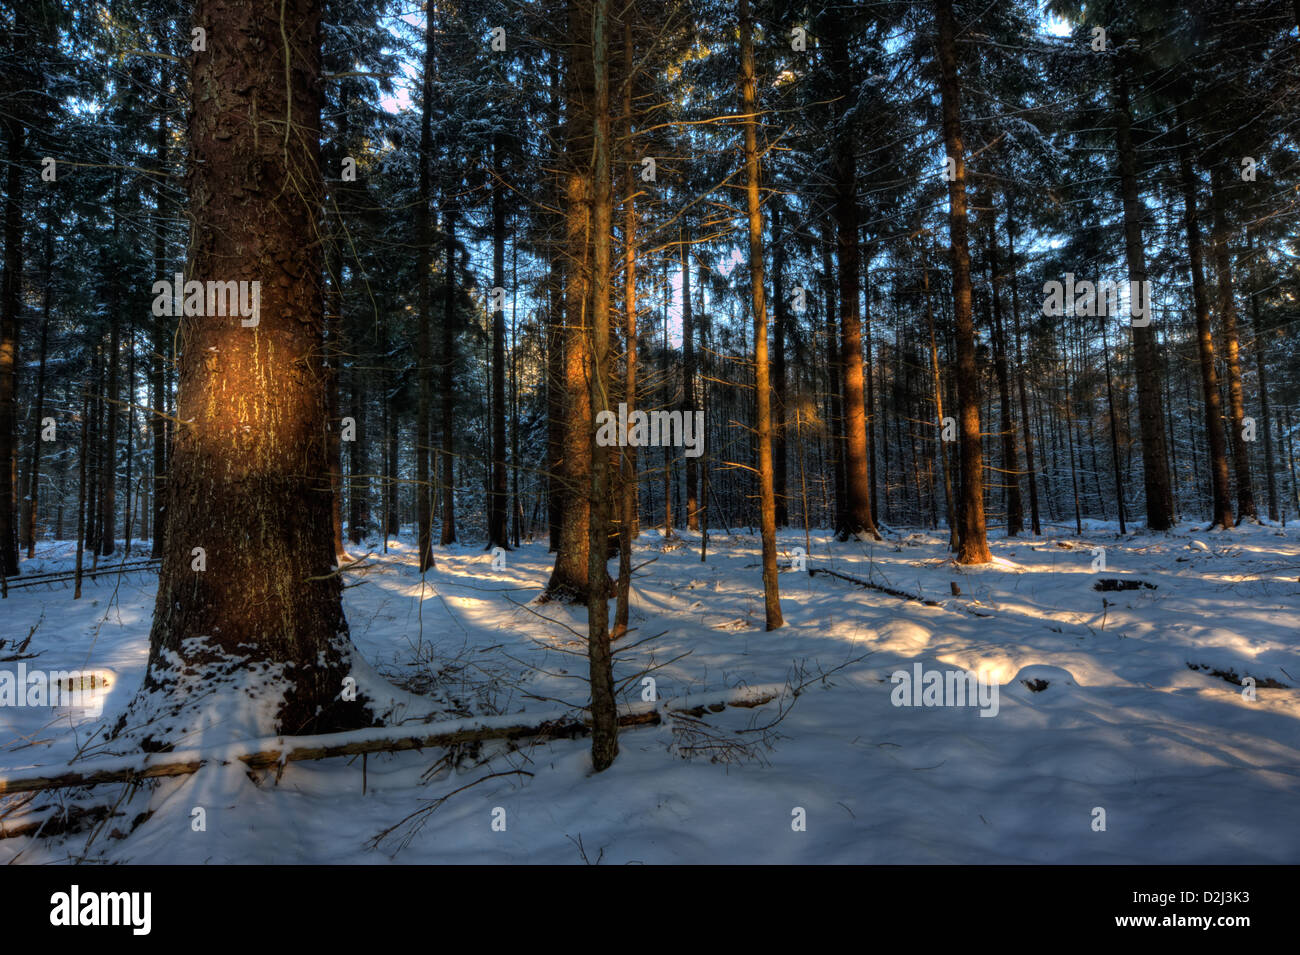 Sunset in a snowy forest, light spots and tree shadows on snow Stock Photo